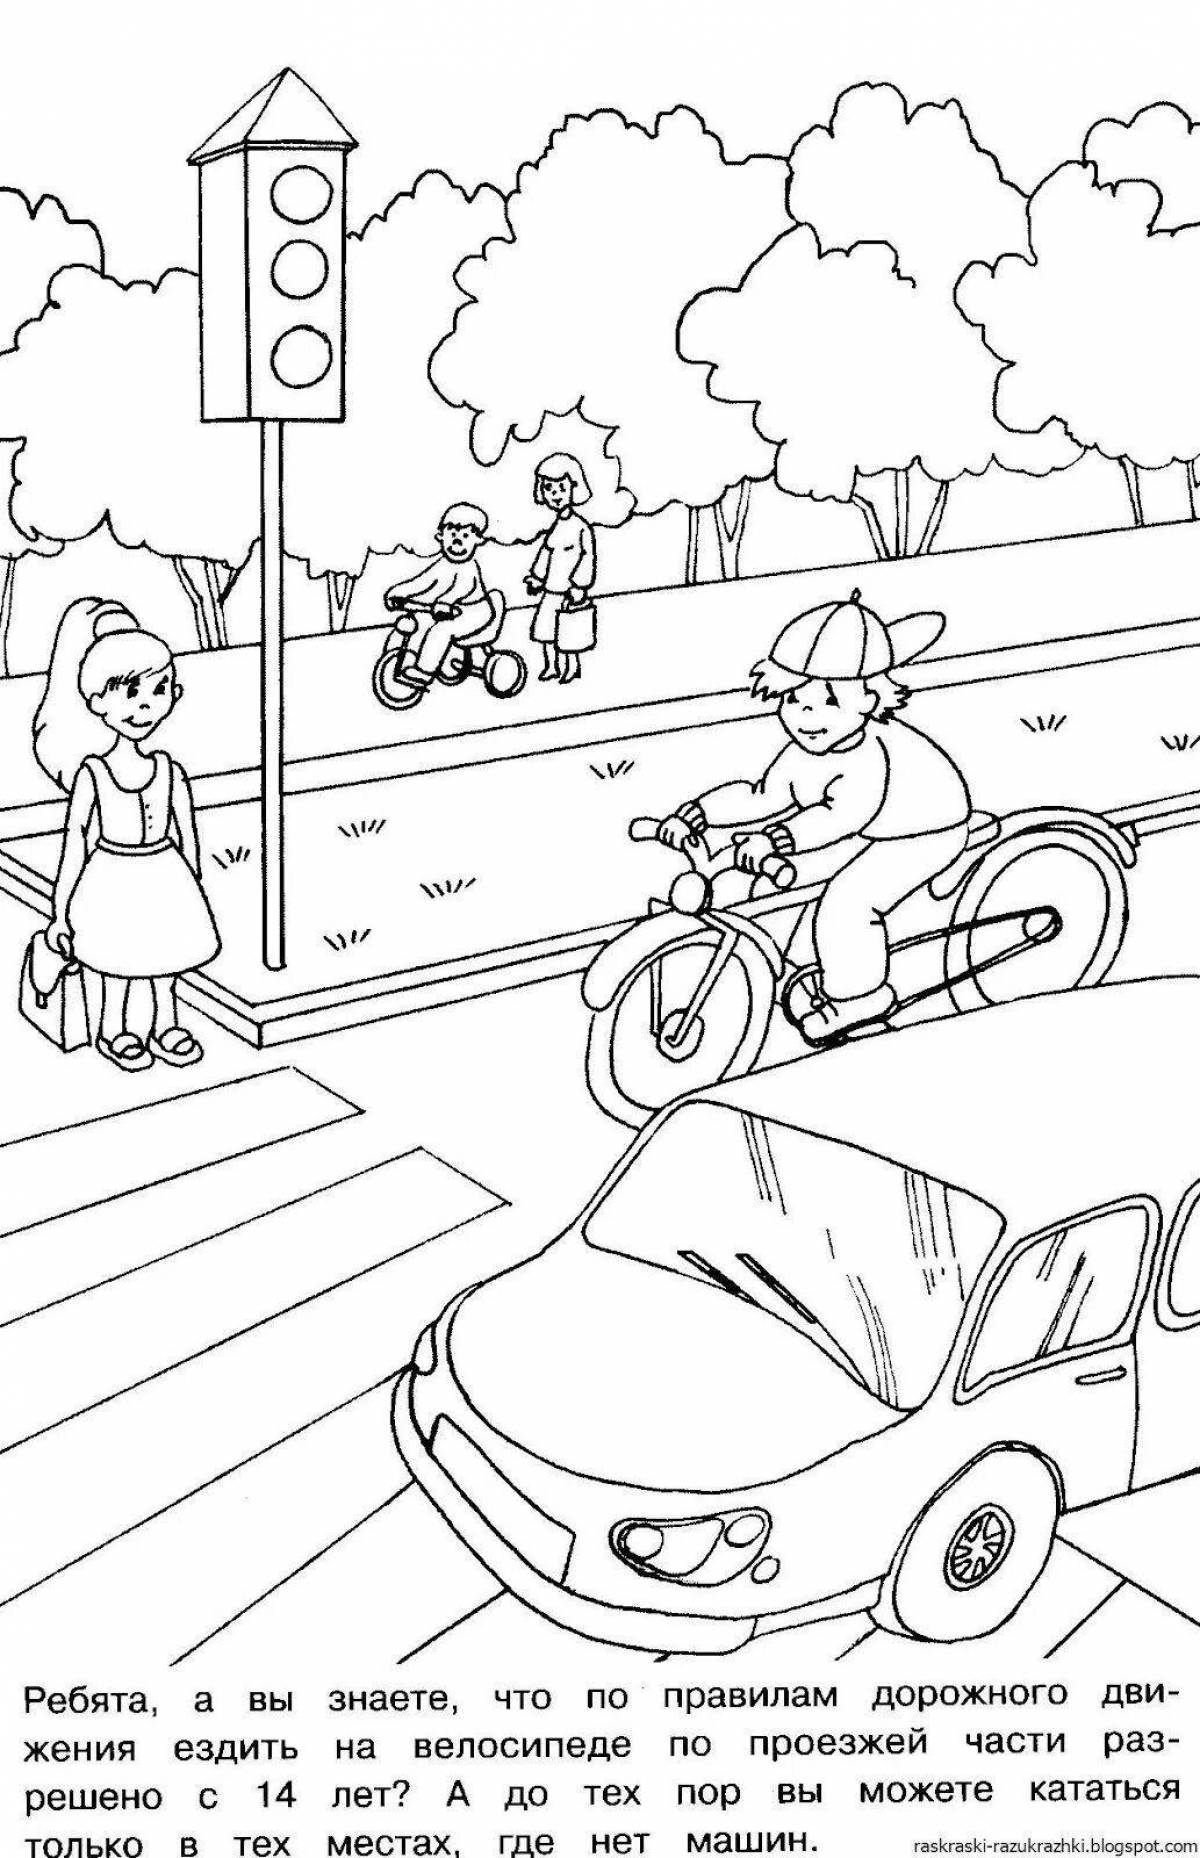 Traffic 1 coloring page